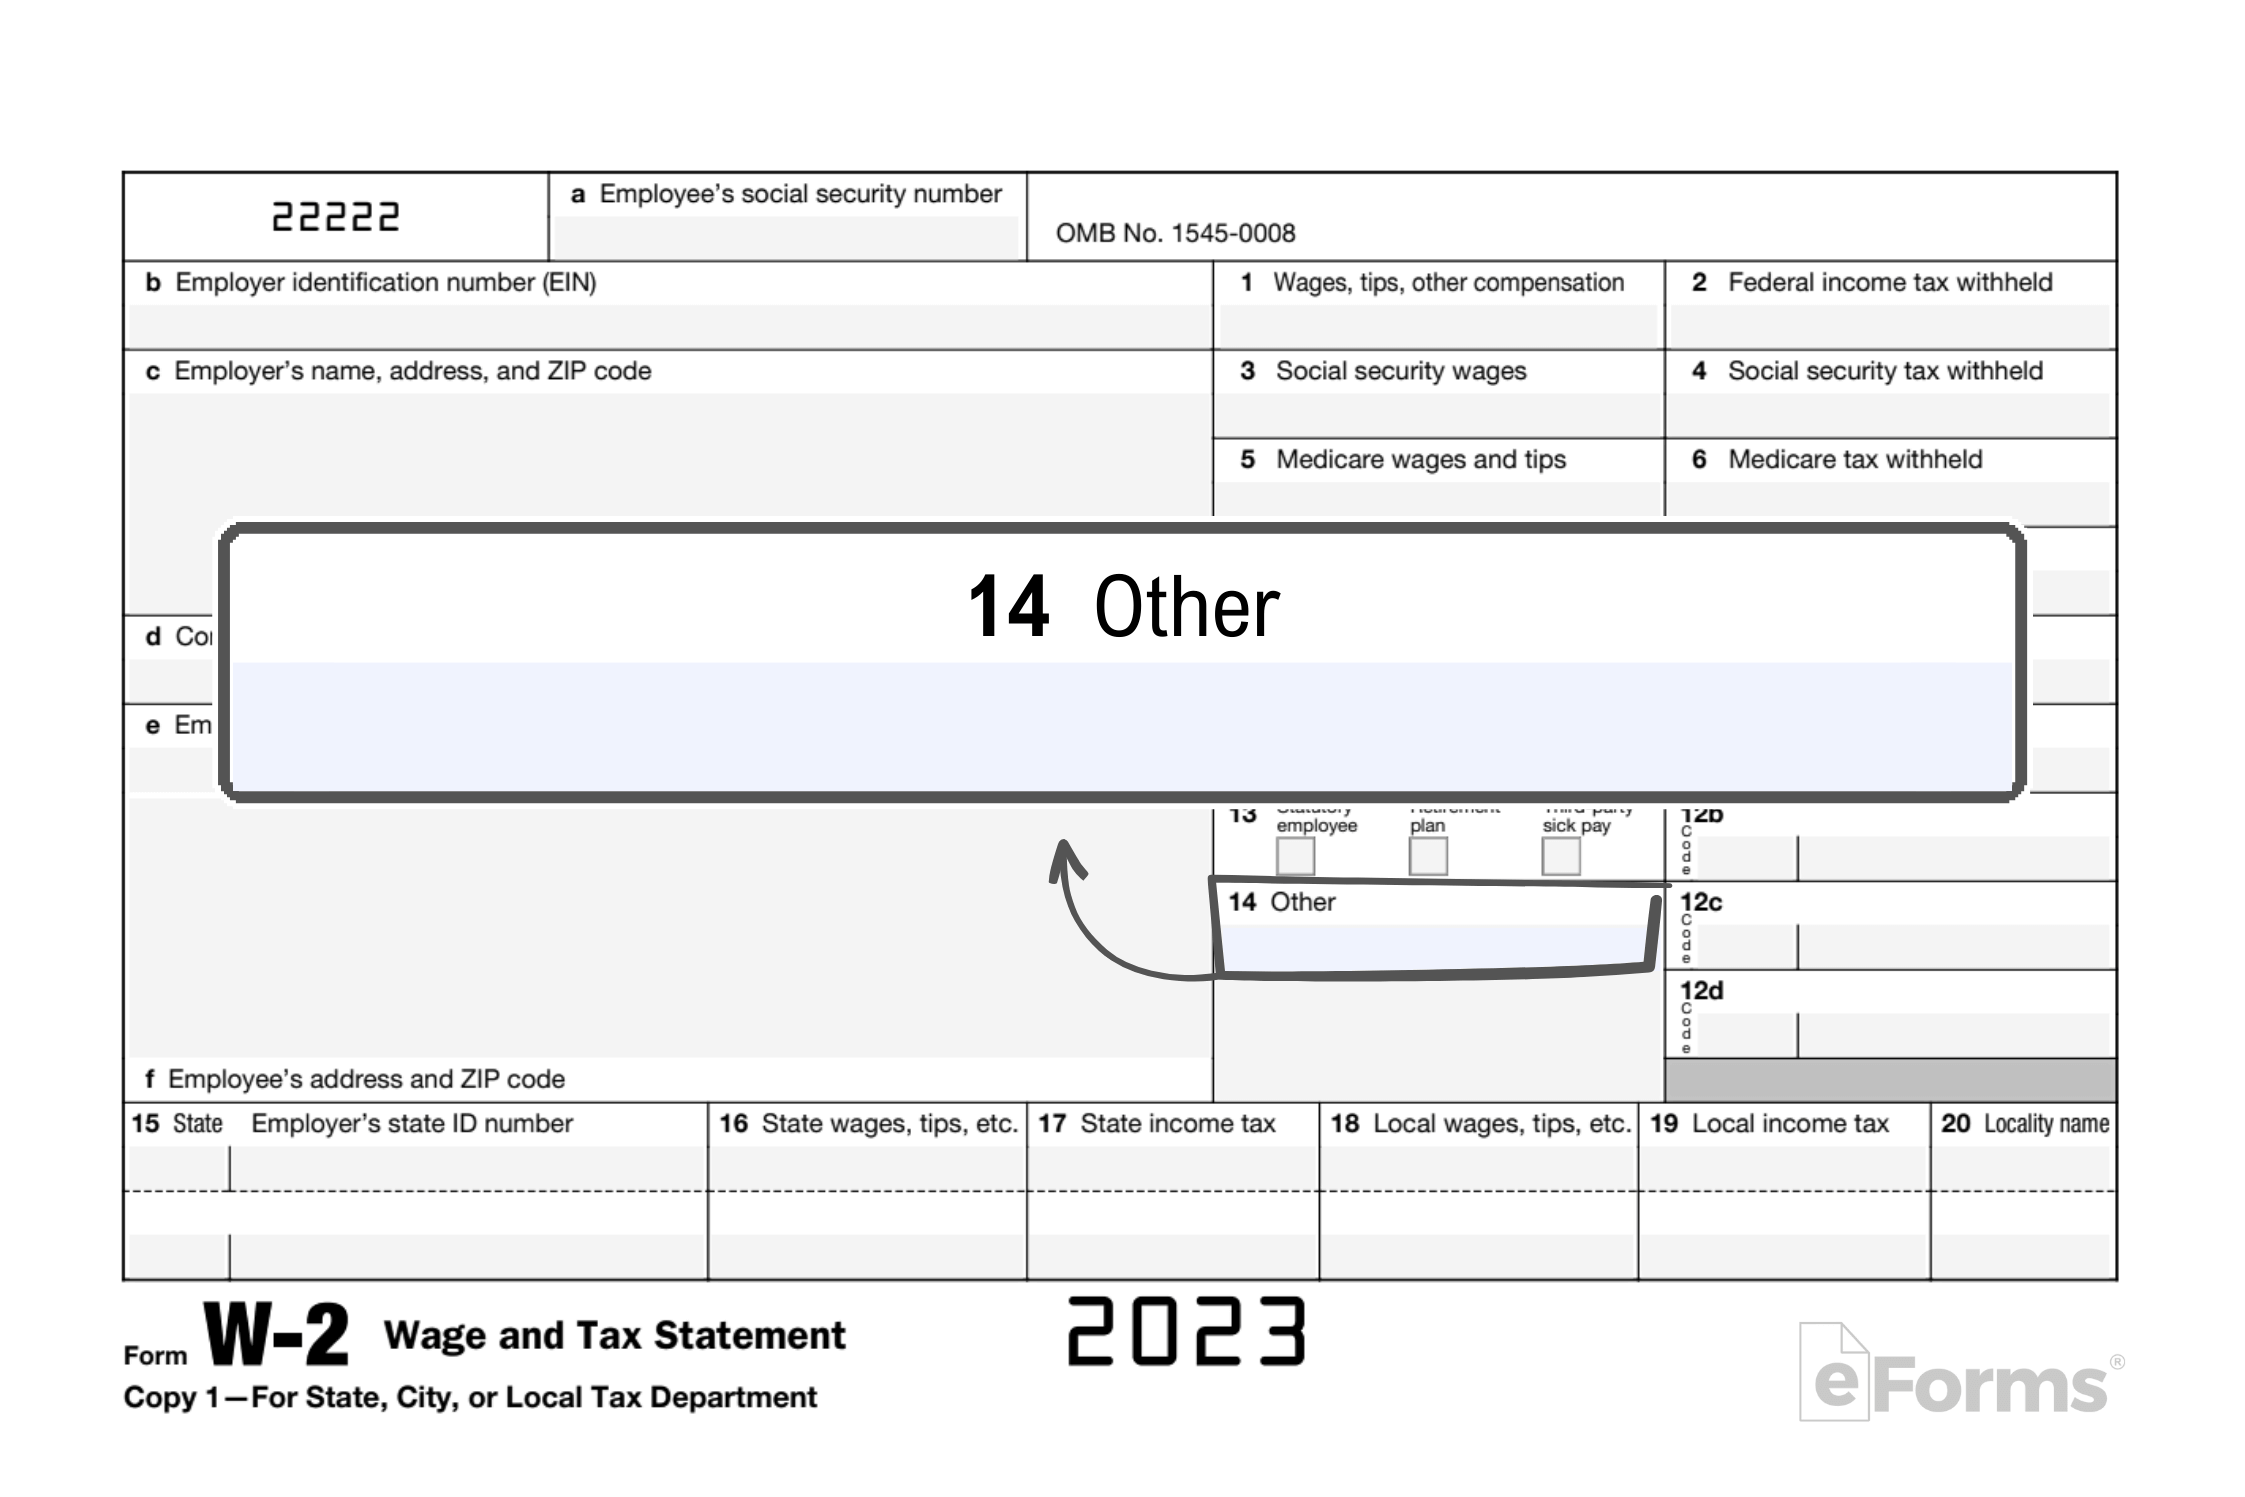 Free Irs Form W-2 | Wage And Tax Statement - Pdf – Eforms within Printable W2 Forms For Employees